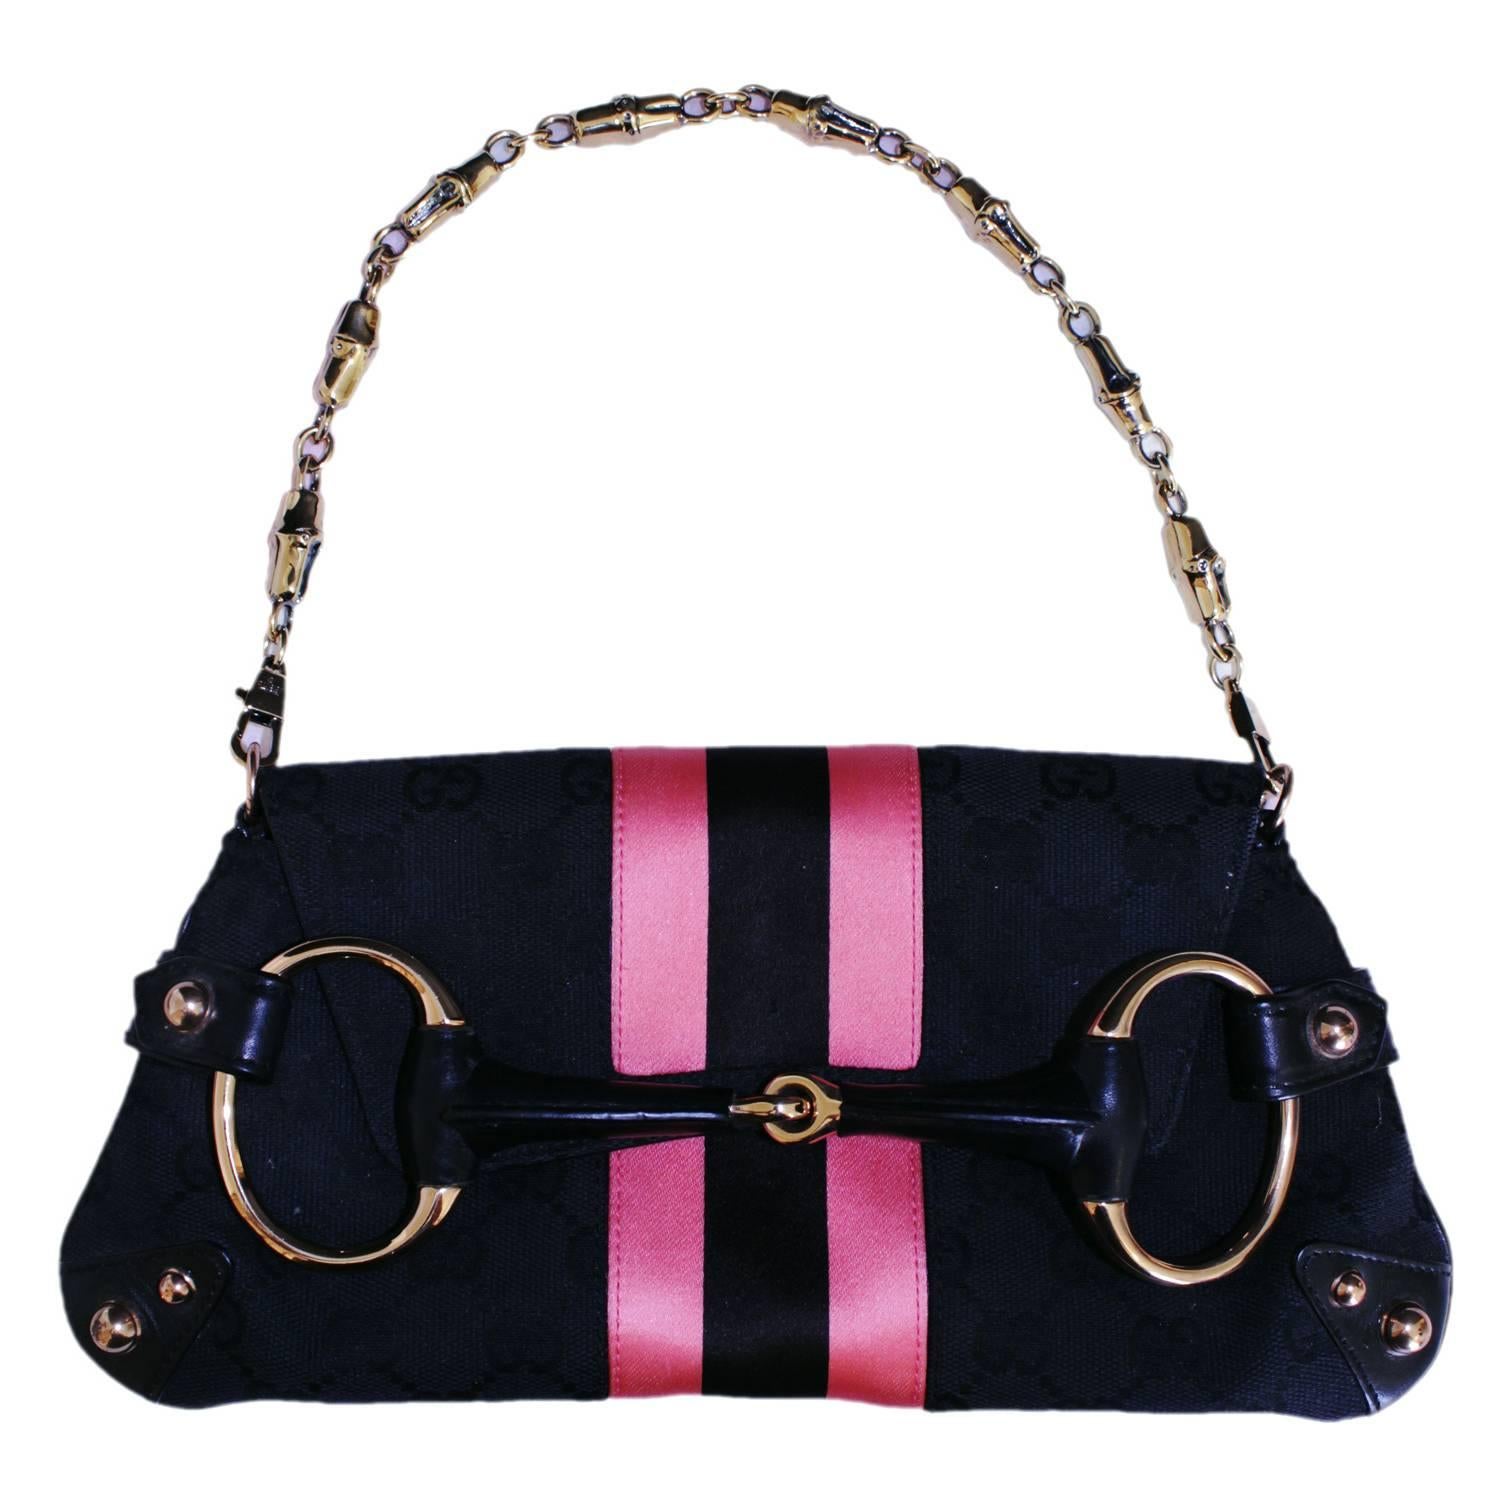 Free Shipping: Black & Pink Studded Horsebit Bag Tom Ford Gucci 2004 Collection!